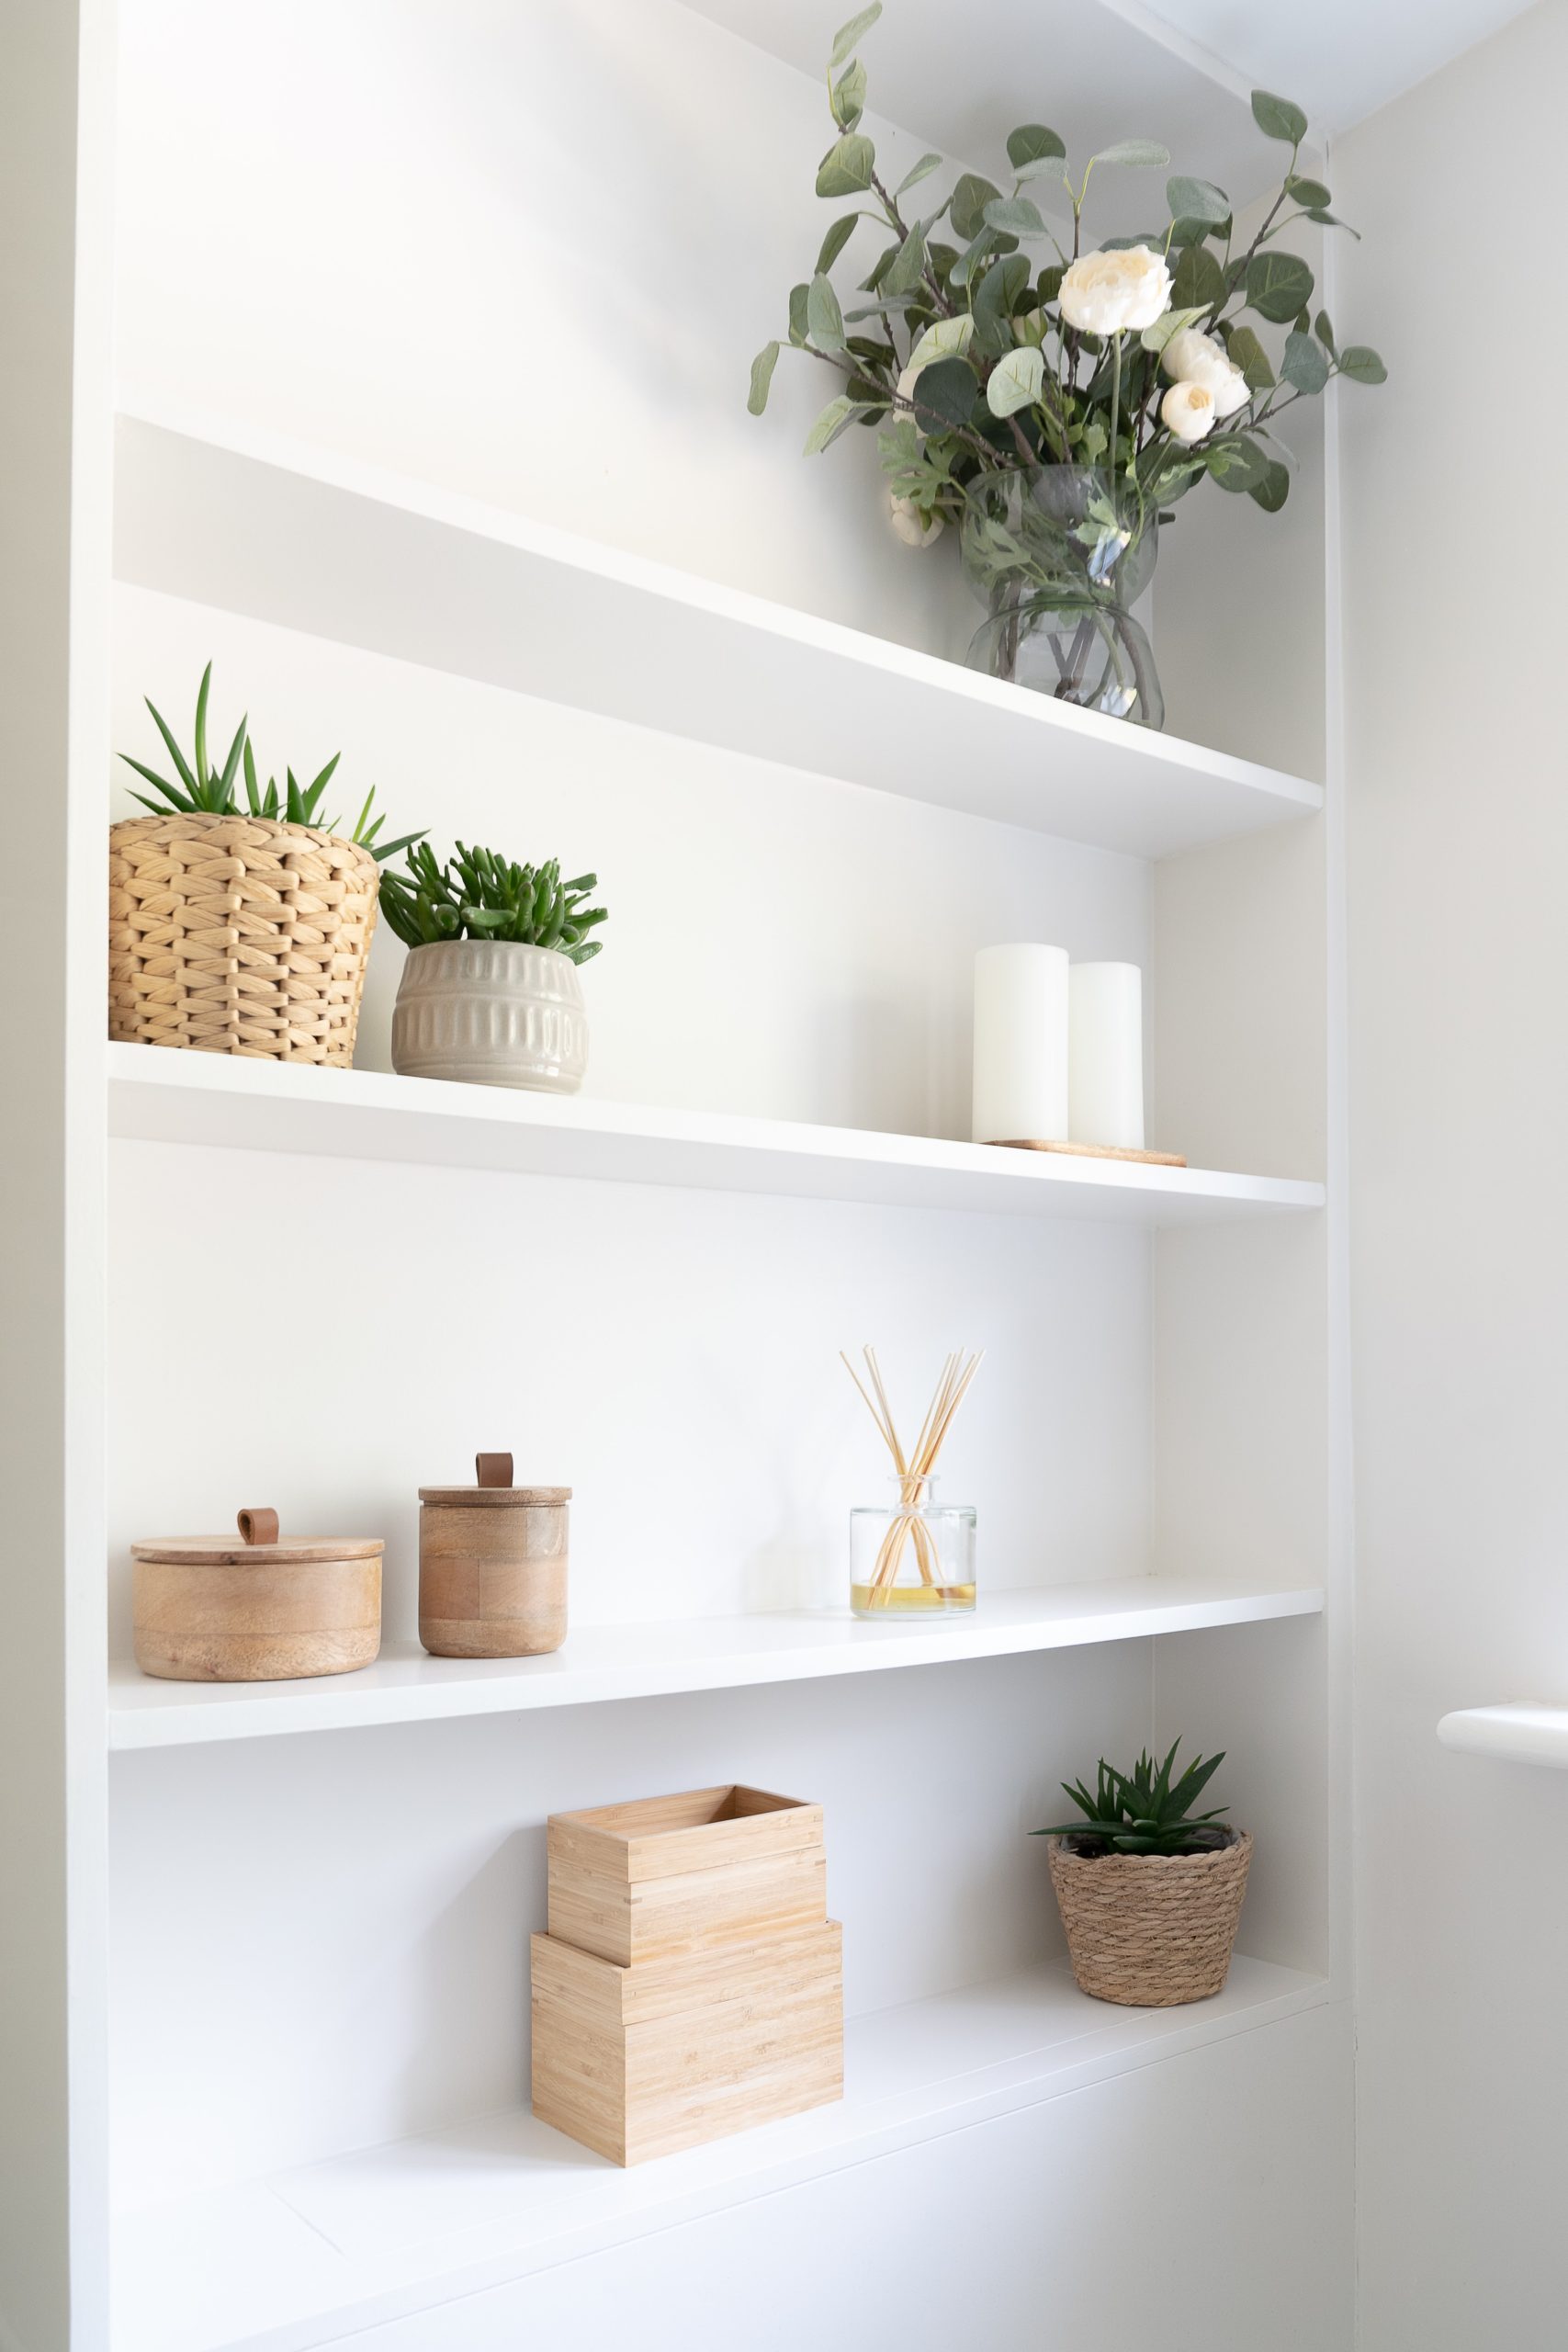 WoW, Modern Design Bathroom Shelving by Campbell